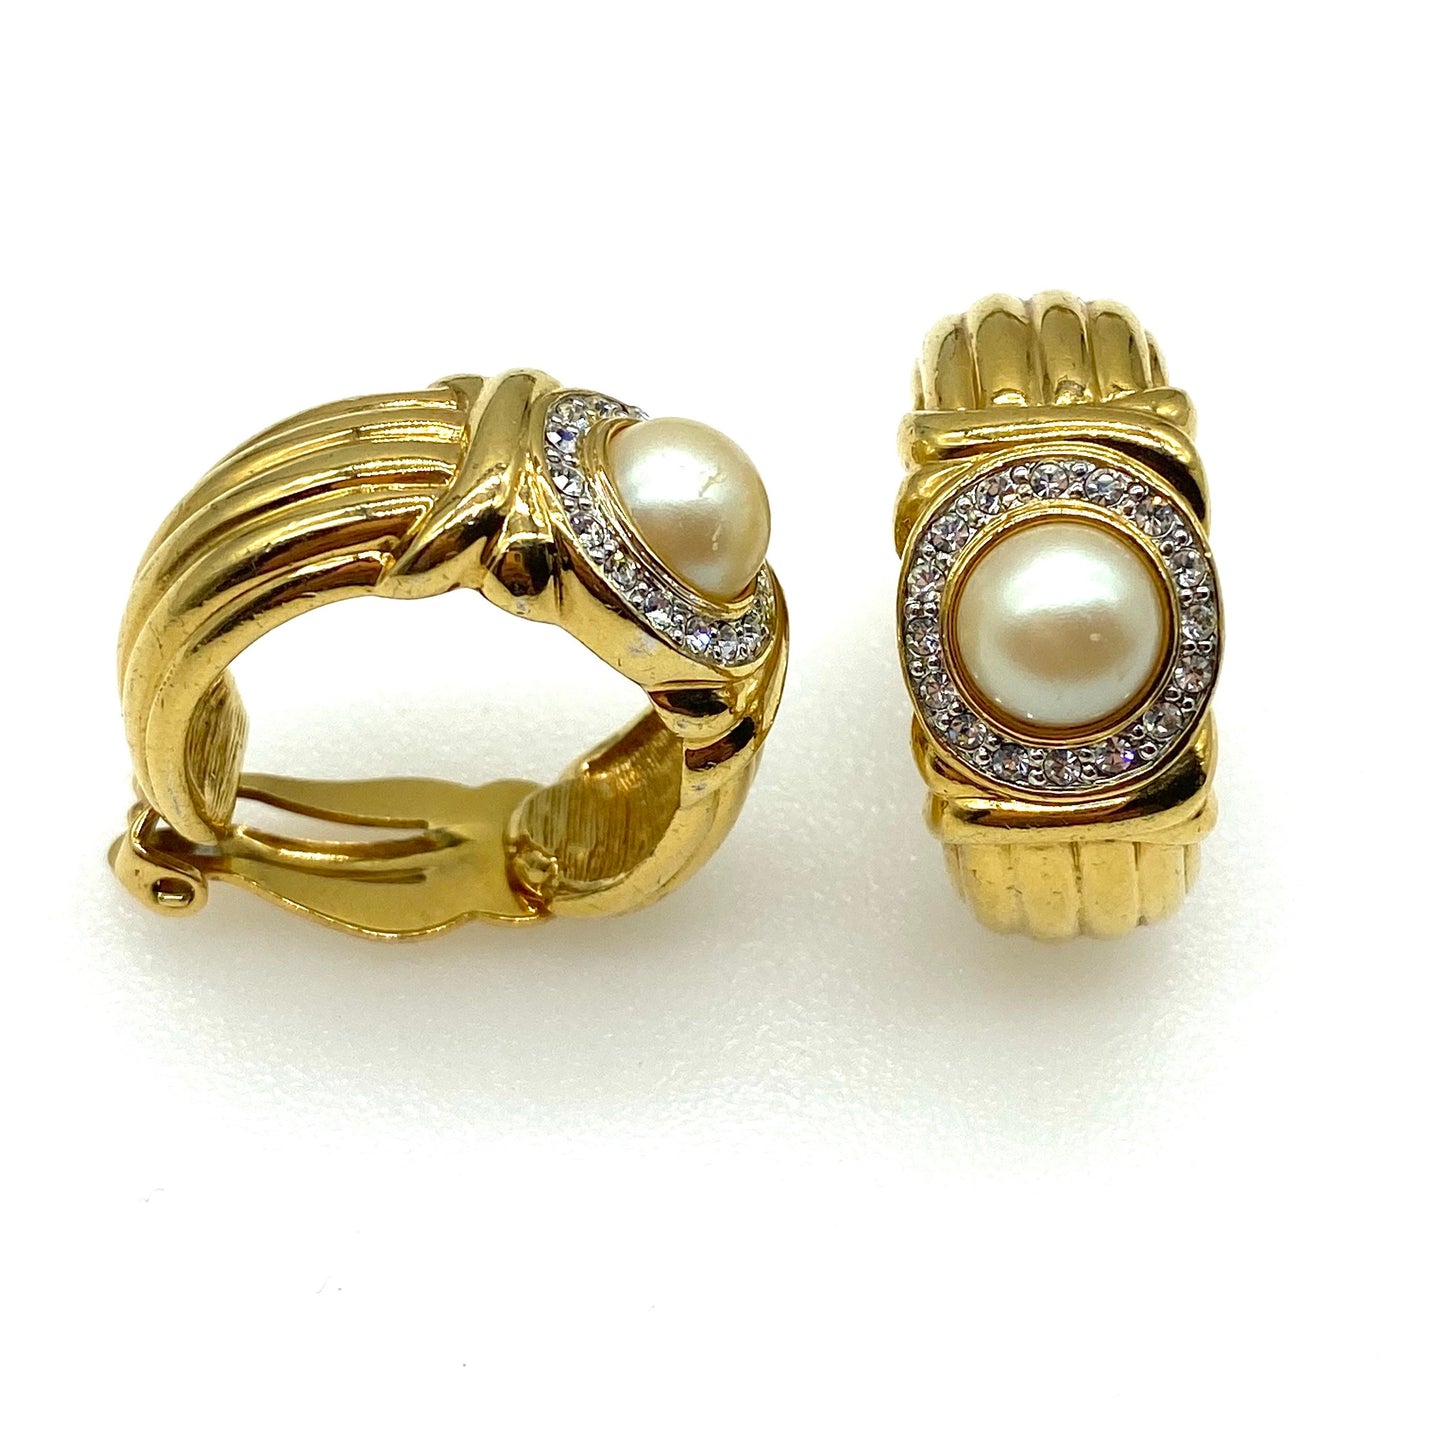 Crystalline Jewelry Company (Pranda) Gold Plated Faux Pearl and Rhinestone Clip On Earrings